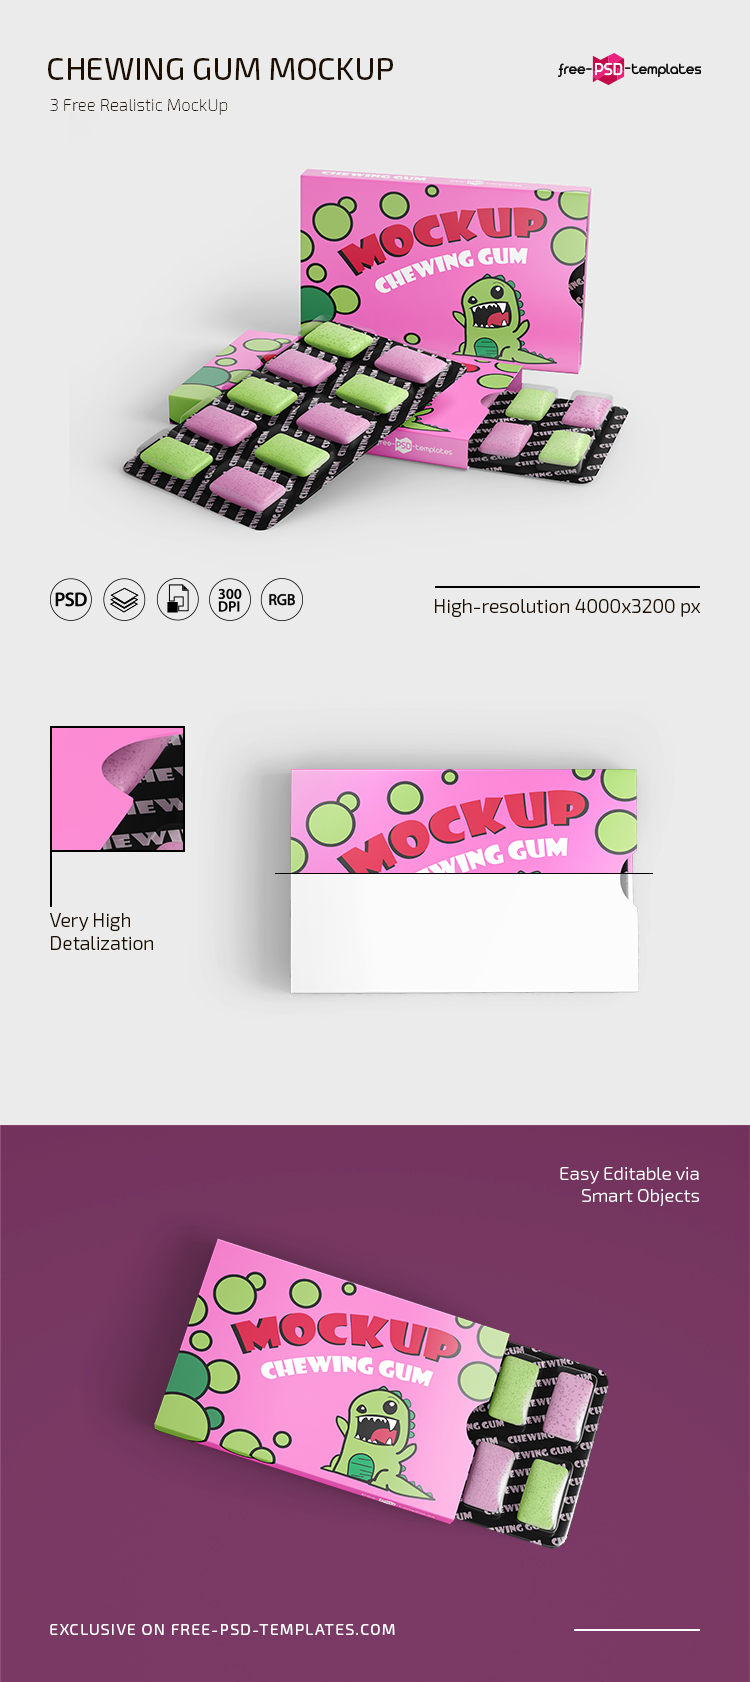 Download Free Chewing Gum Mockup Templates In Psd Free Psd Templates